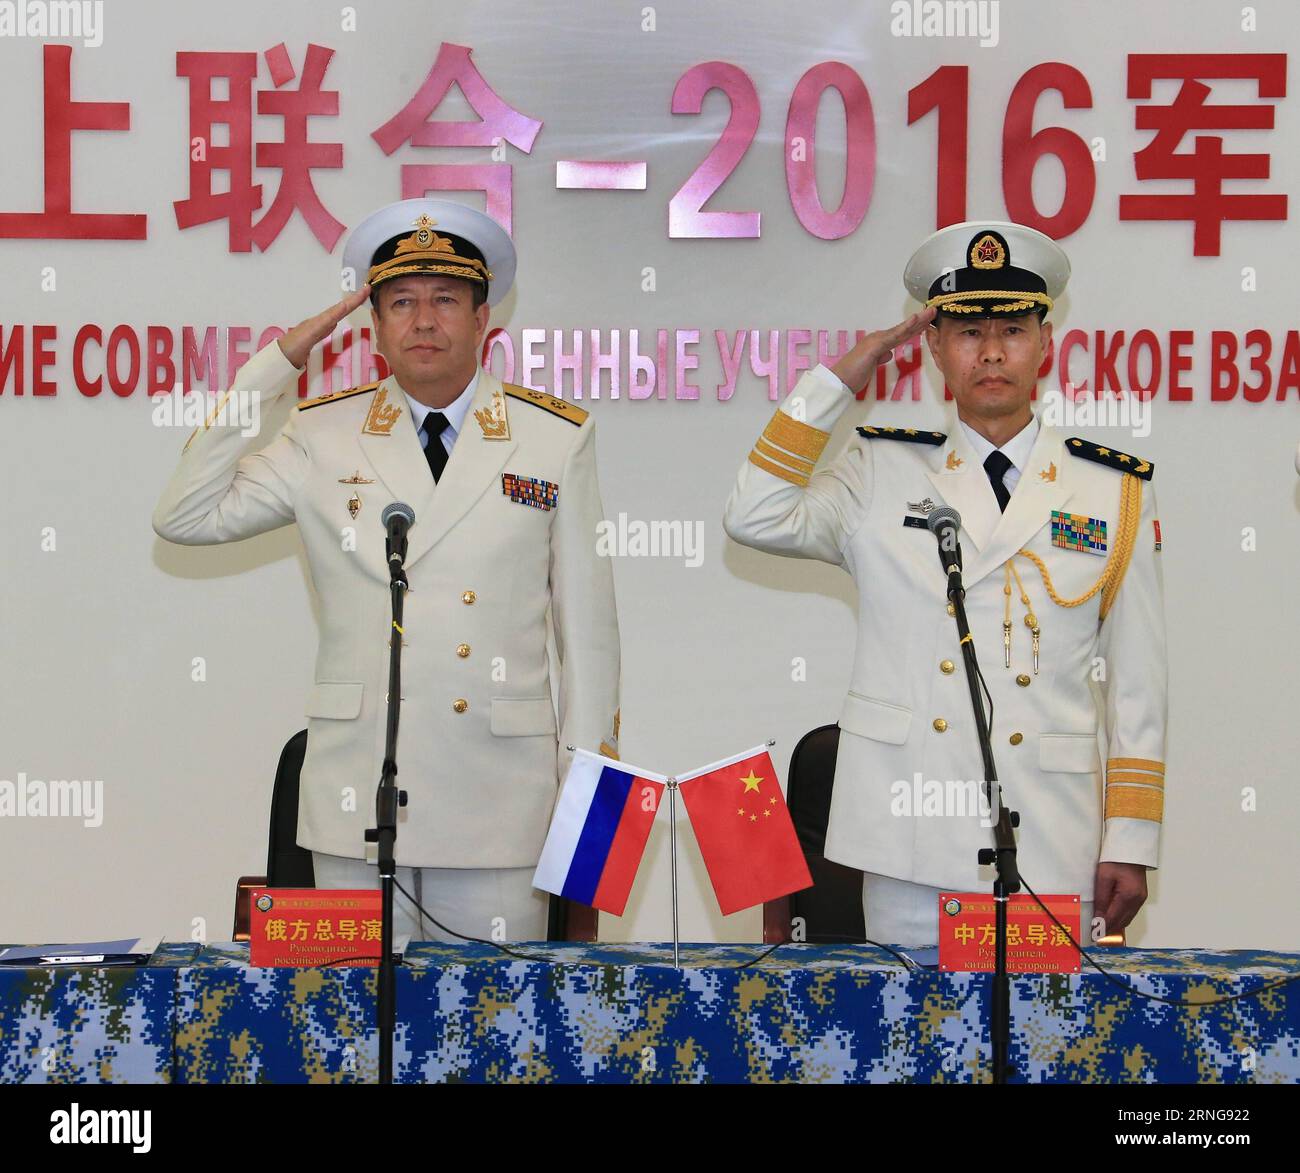 (160913) -- ZHANJIANG, Sept. 13, 2016 -- Wang Hai (R), Chinese chief director of the exercise and deputy commander of the Chinese Navy, and his Russian counterpart Alexander Fedotenkov declare the start of a joint naval drill in Zhanjiang, south China s Guangdong Province, Sept. 13, 2016. China and Russia started Joint Sea 2016 drill off Guangdong Province in the South China Sea on Tuesday. ) (zhs) CHINA-RUSSIA-JOINT NAVAL DRILL-START (CN) ZhaxChunming PUBLICATIONxNOTxINxCHN   160913 Zhanjiang Sept 13 2016 Wang Hai r Chinese Chief Director of The EXERCISE and Deputy Commander of The Chinese Na Stock Photo